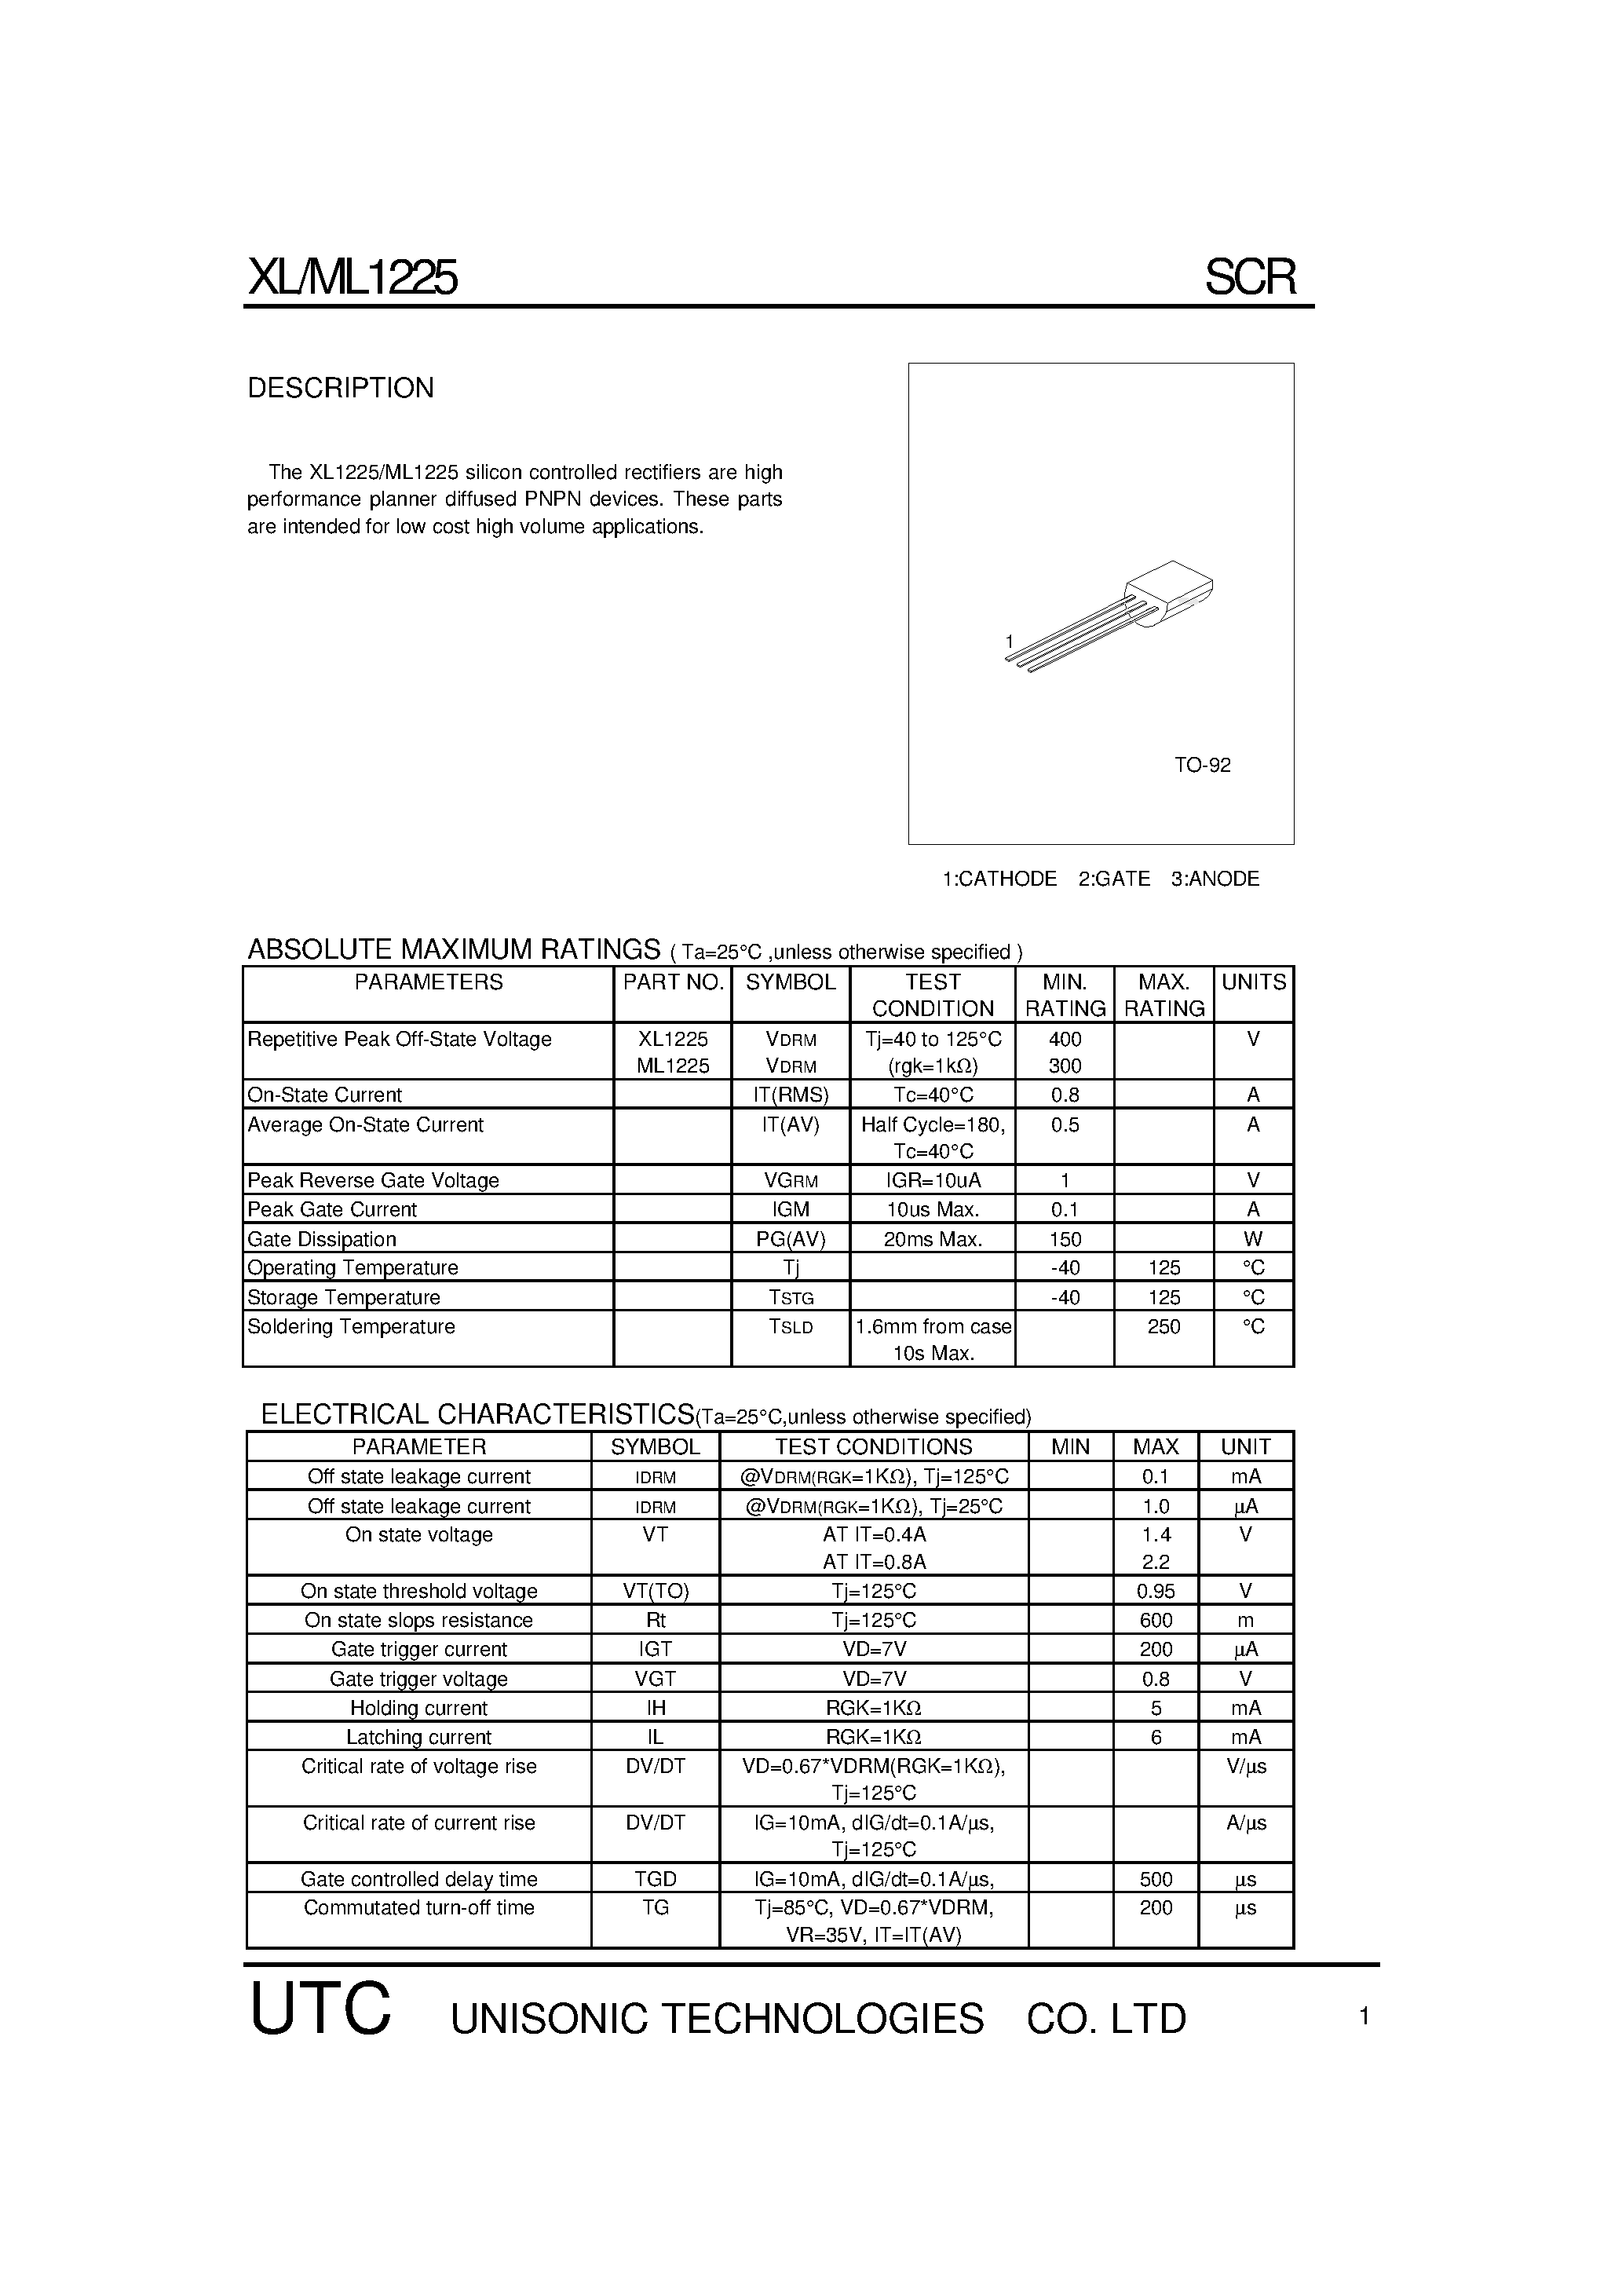 Datasheet XL1225 - The XL1225/ML1225 silicon controlled rectifiers page 1